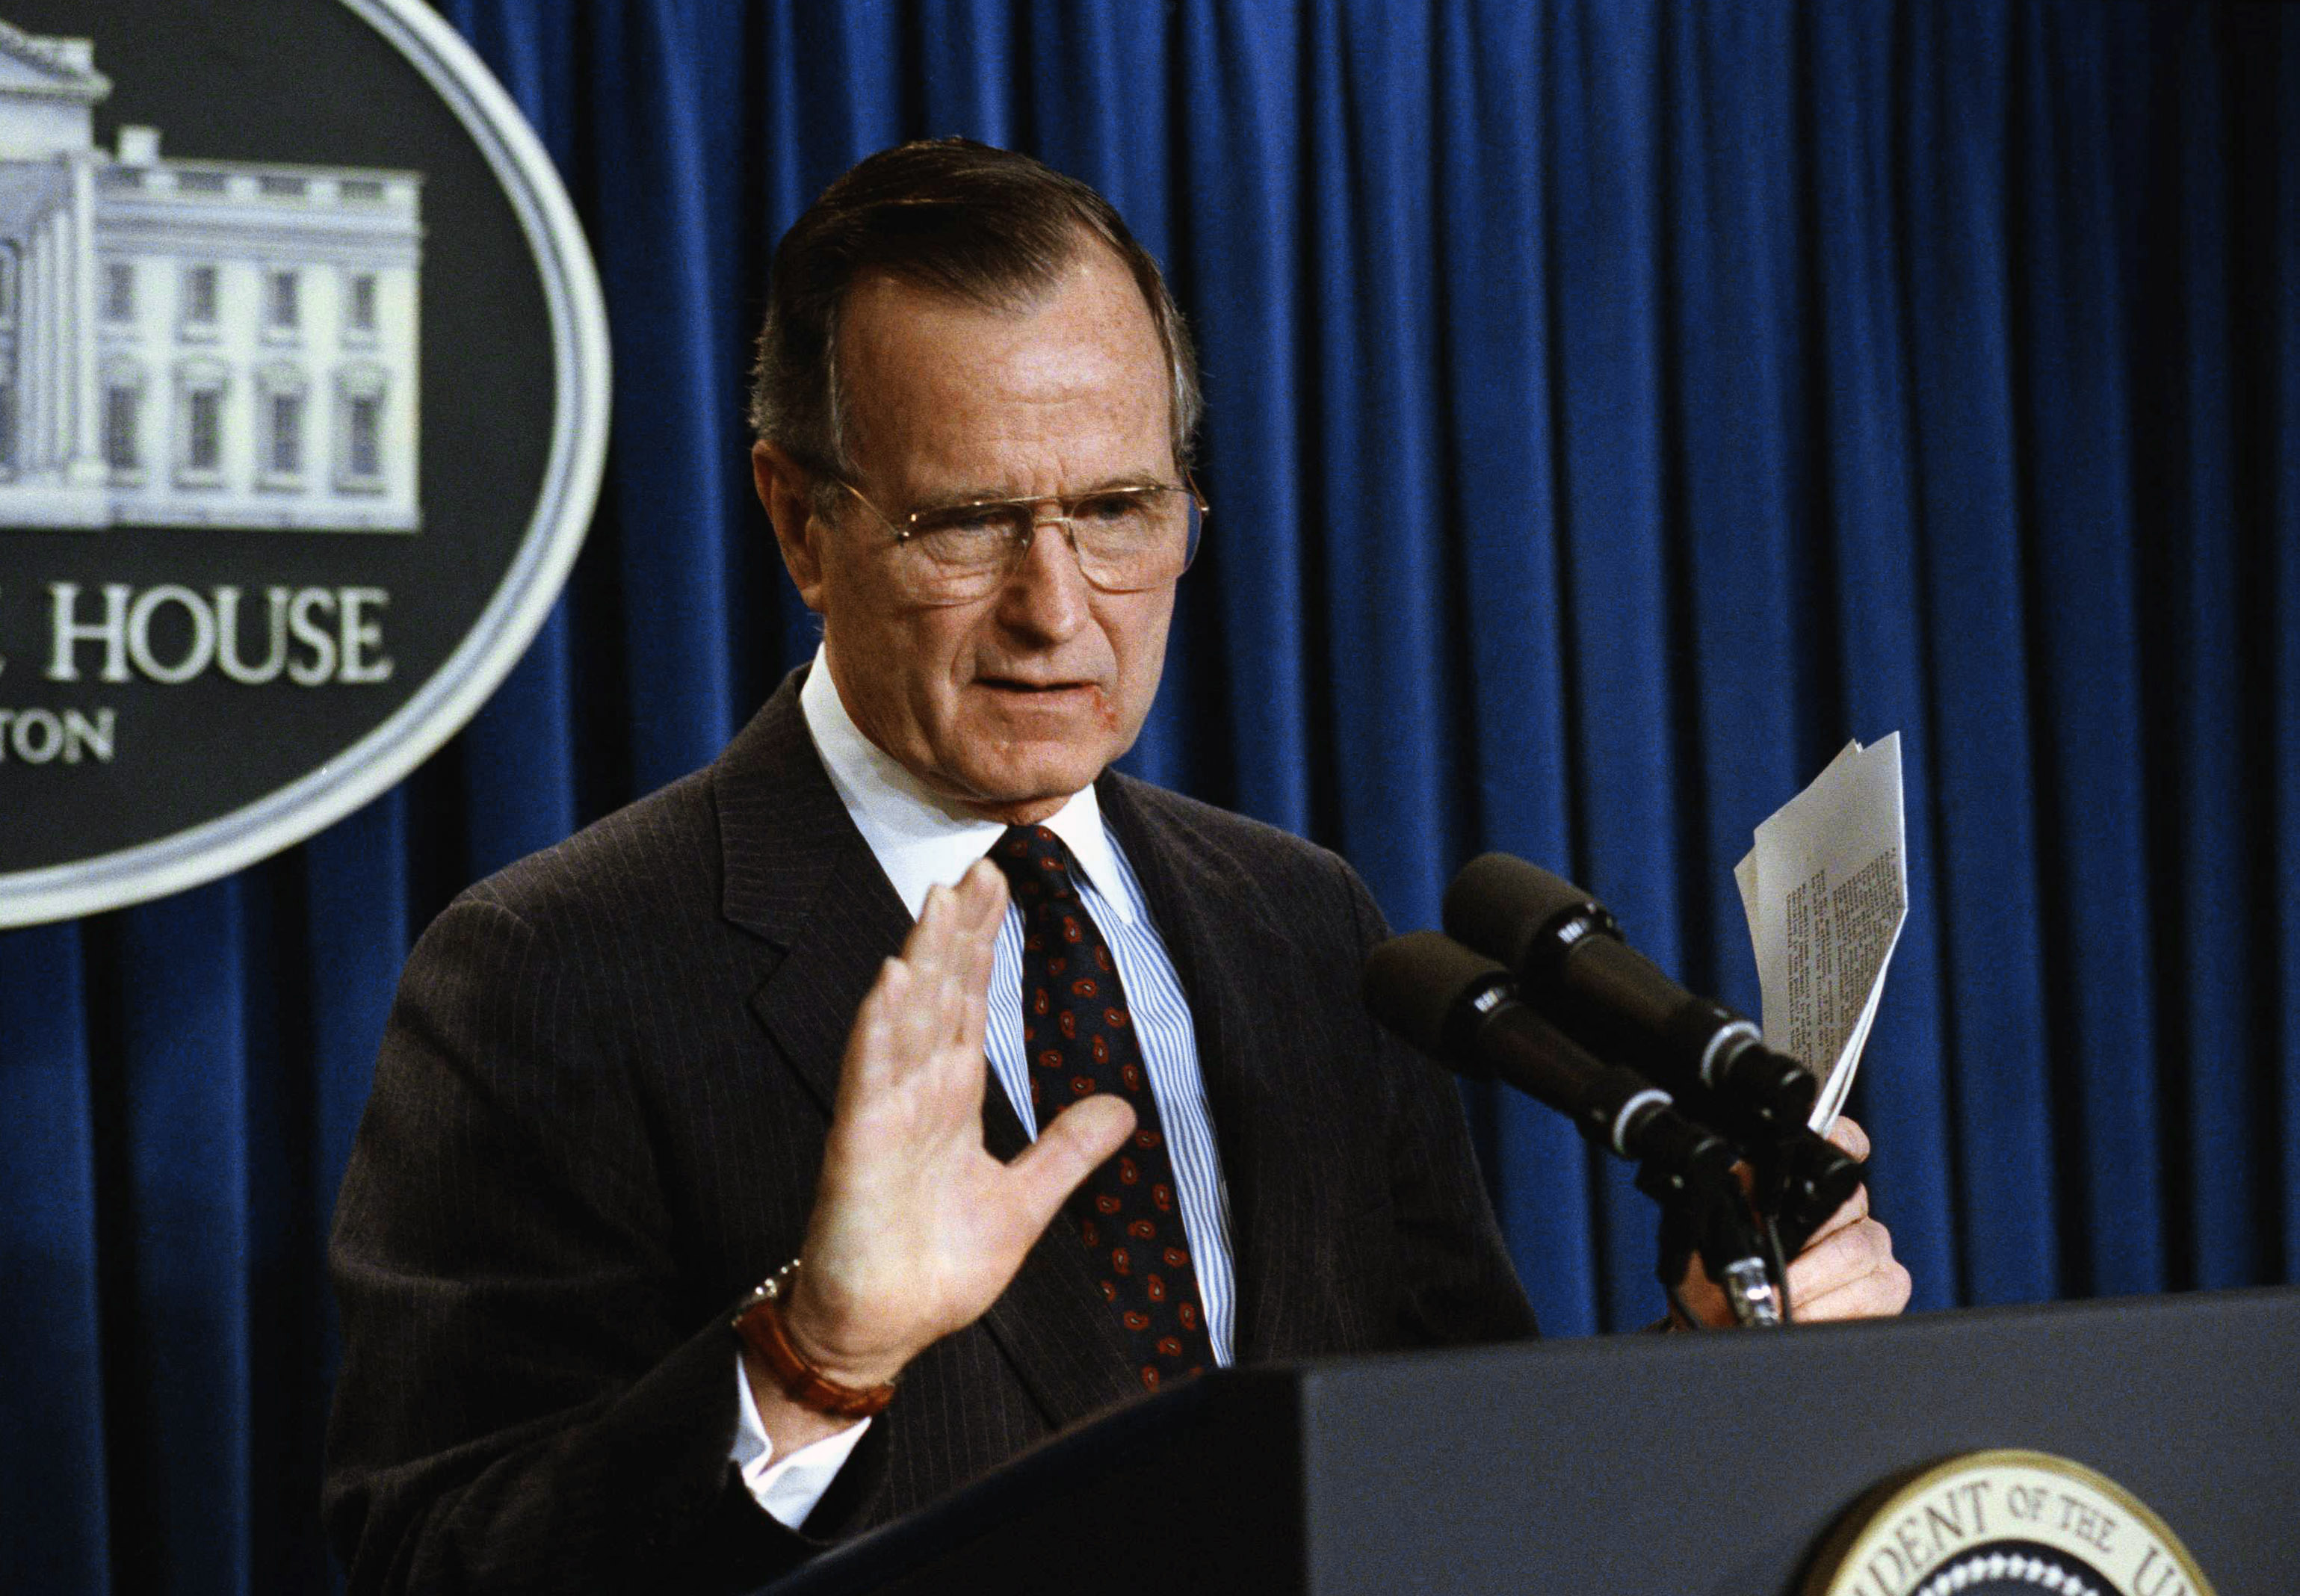 U.S. President George H. Bush gestures while speaking to reporters in the White House in Washington, Monday, Dec.17, 1990. Bush said he still hopes for talk with Iraq on resolving the Persian gulf crisis, but said Iraqi forces must be out of Kuwait by January 15, "and that means entirely." Bush would not say what he'd do if the headline wasn't met. (AP Photo/Marcy Nighswander)